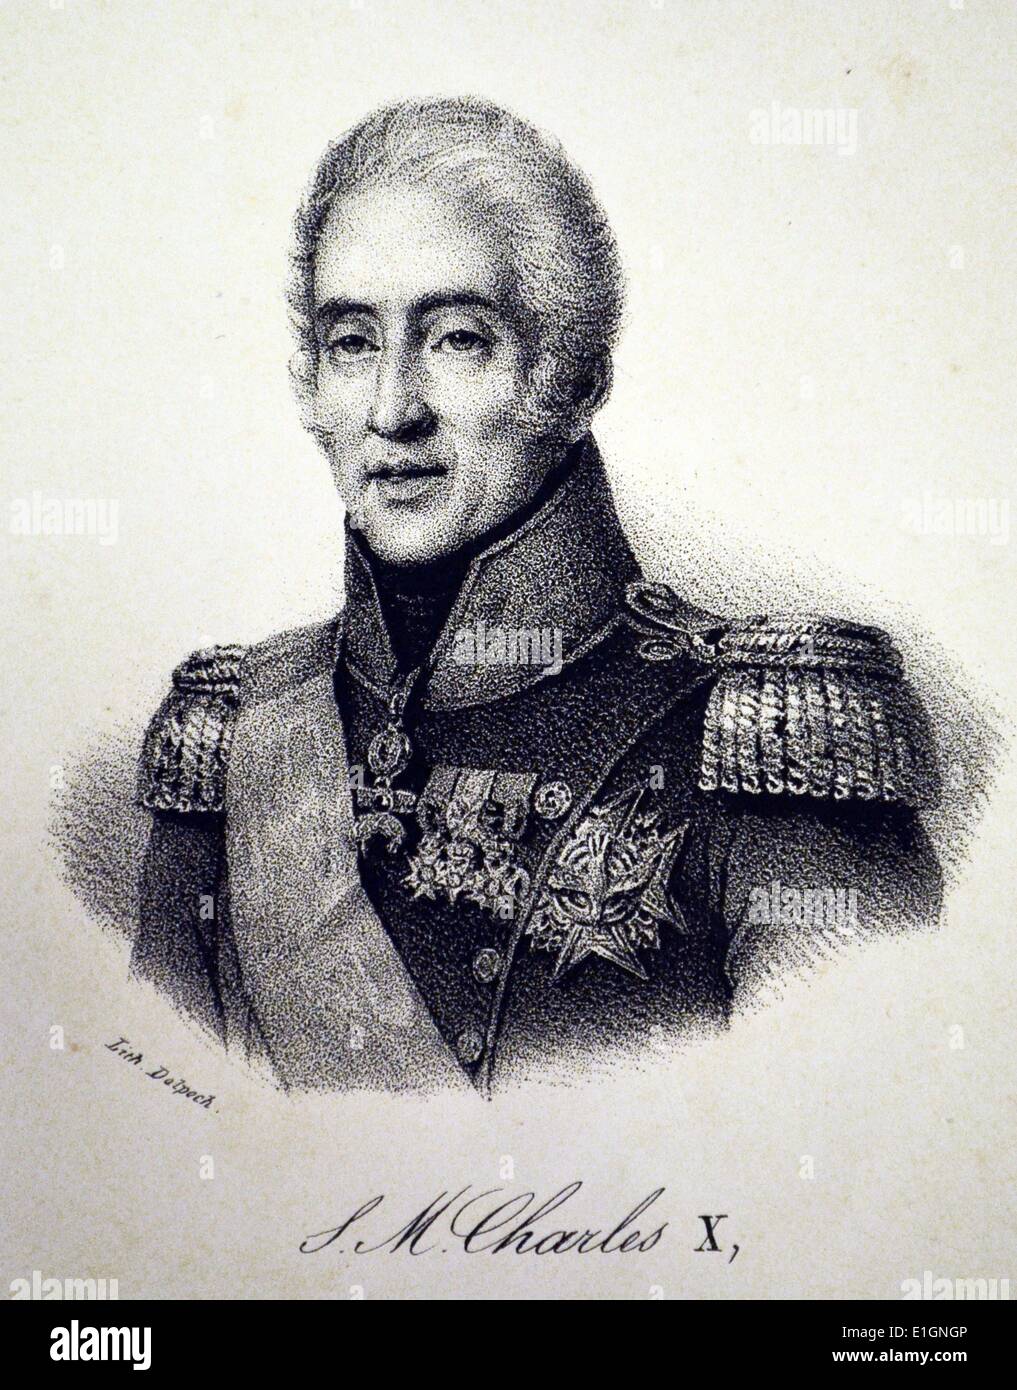 Charles X Of France - The Last Bourbon King 